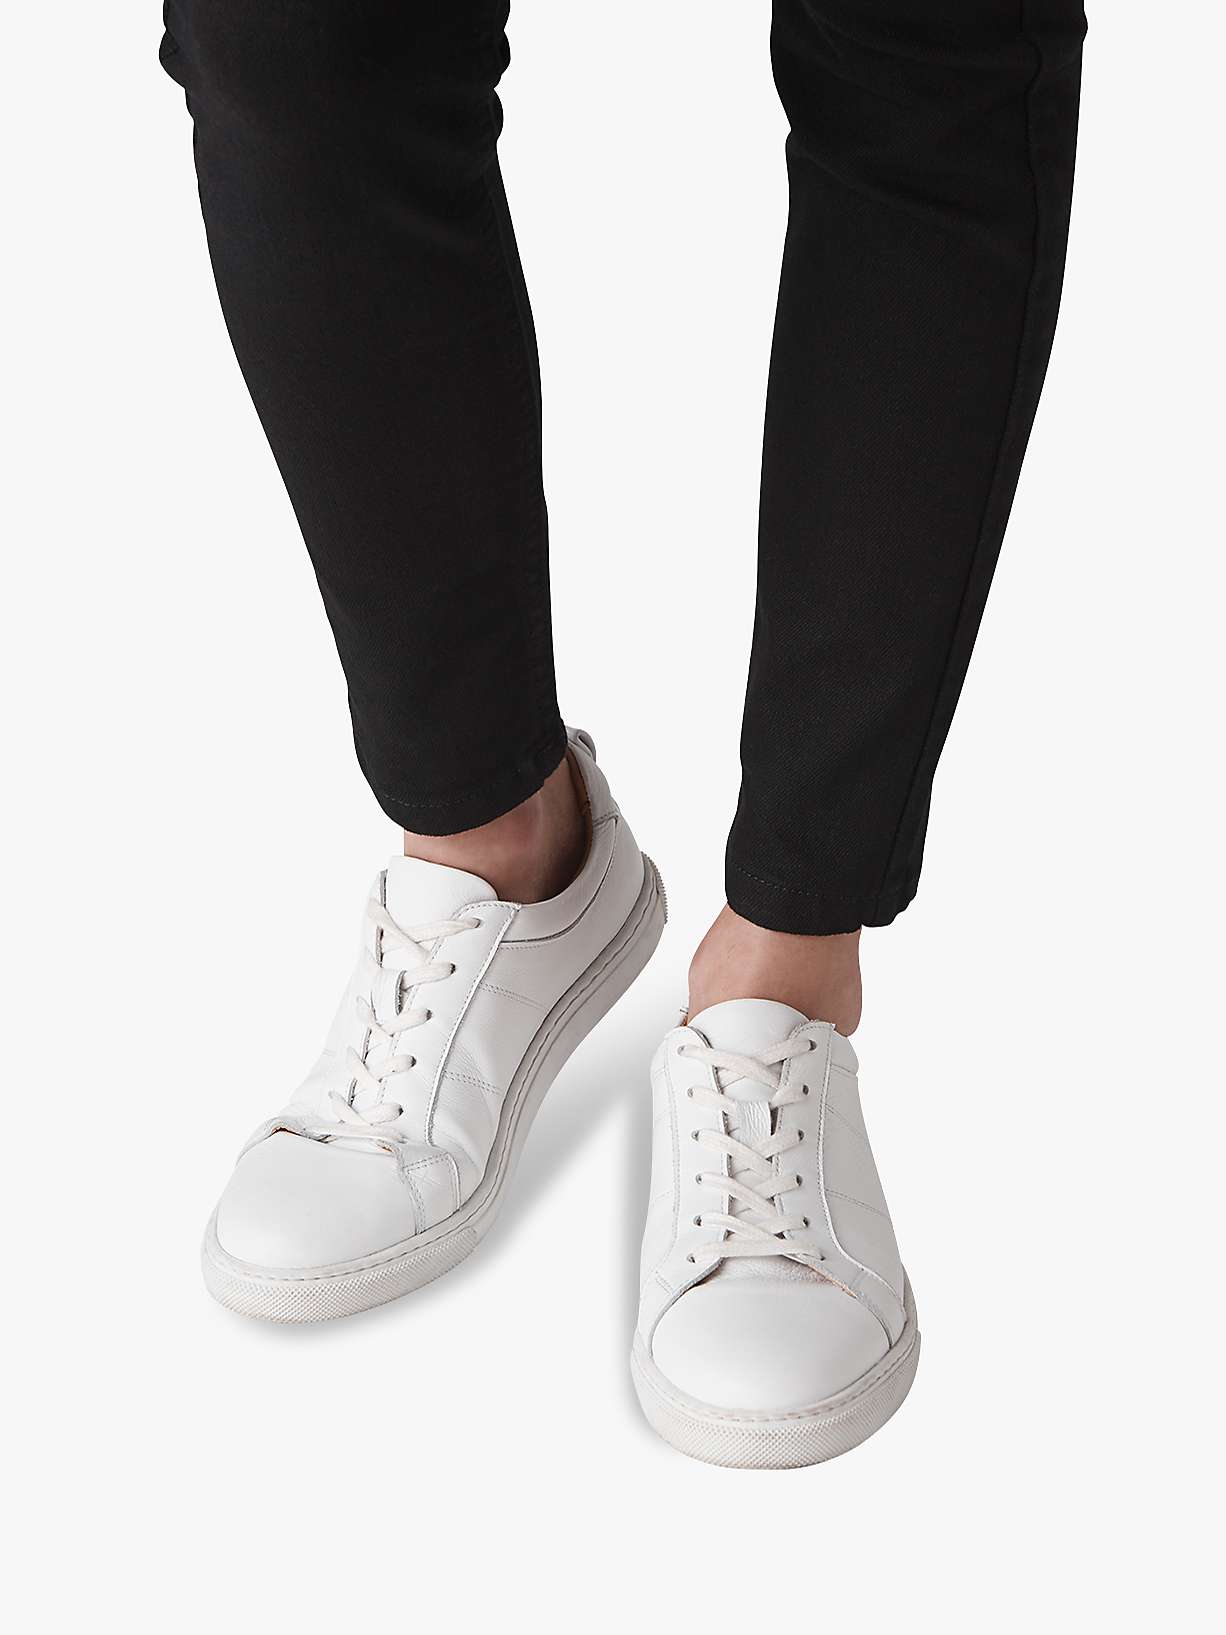 Buy Whistles Koki Leather Lace Up Trainers, White Online at johnlewis.com